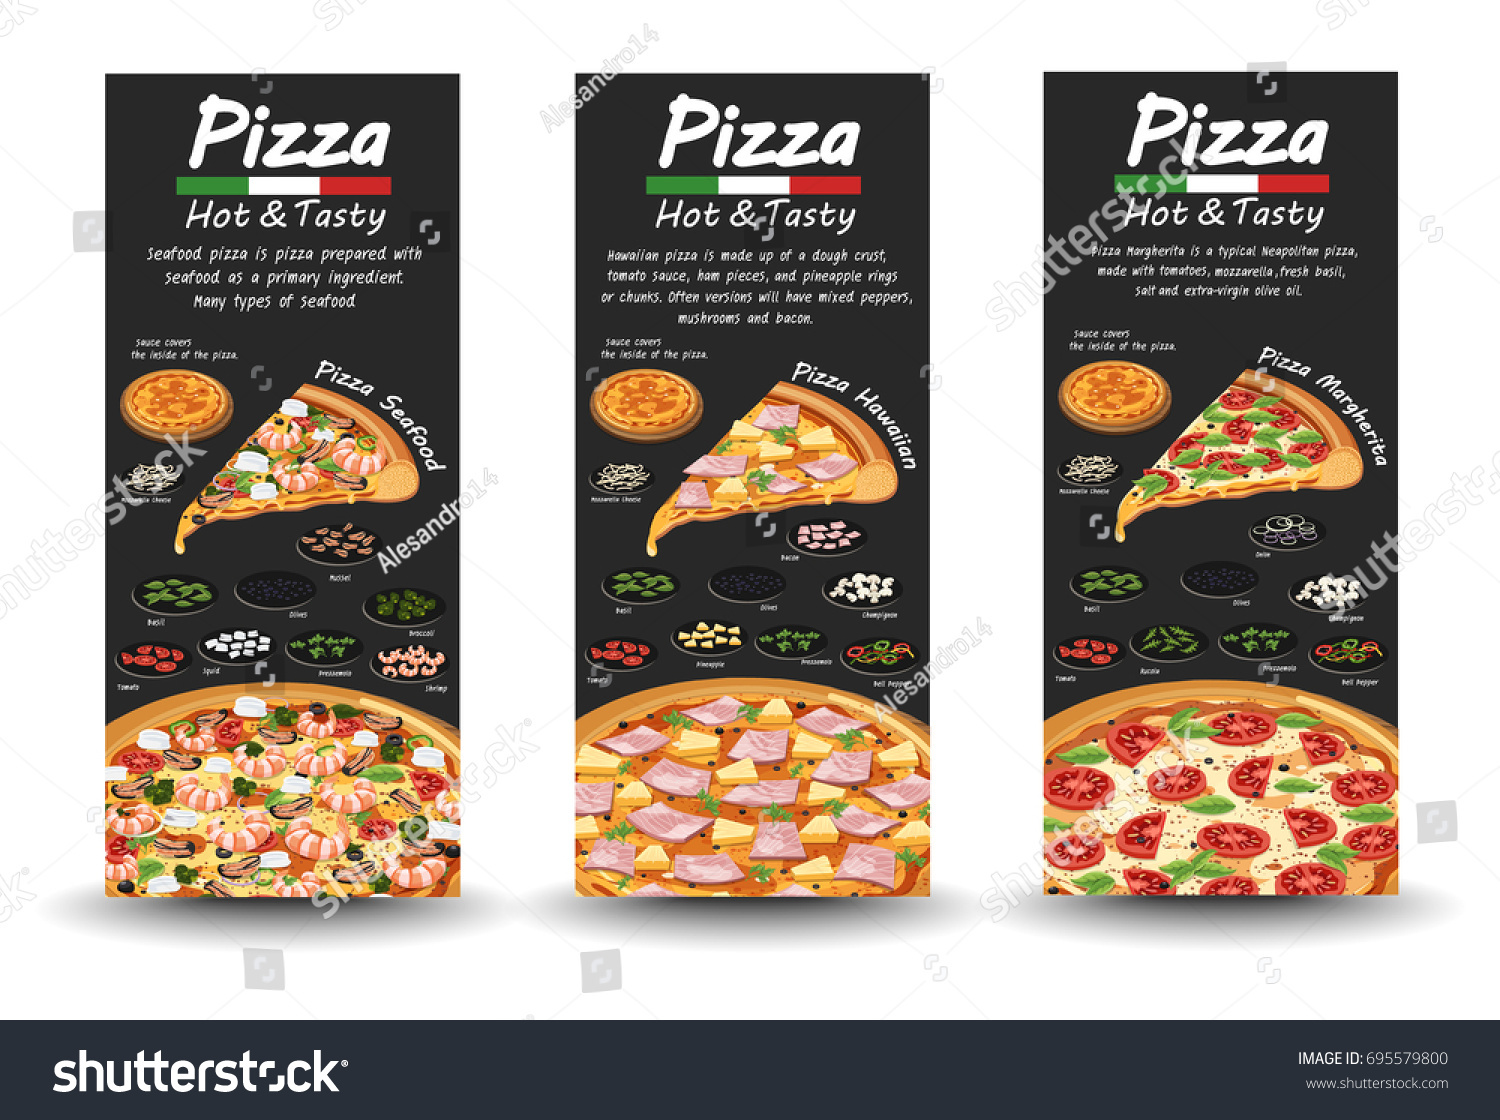 Pizza Pizzeria Flyer Vector Background Two Stock Vector Royalty Free